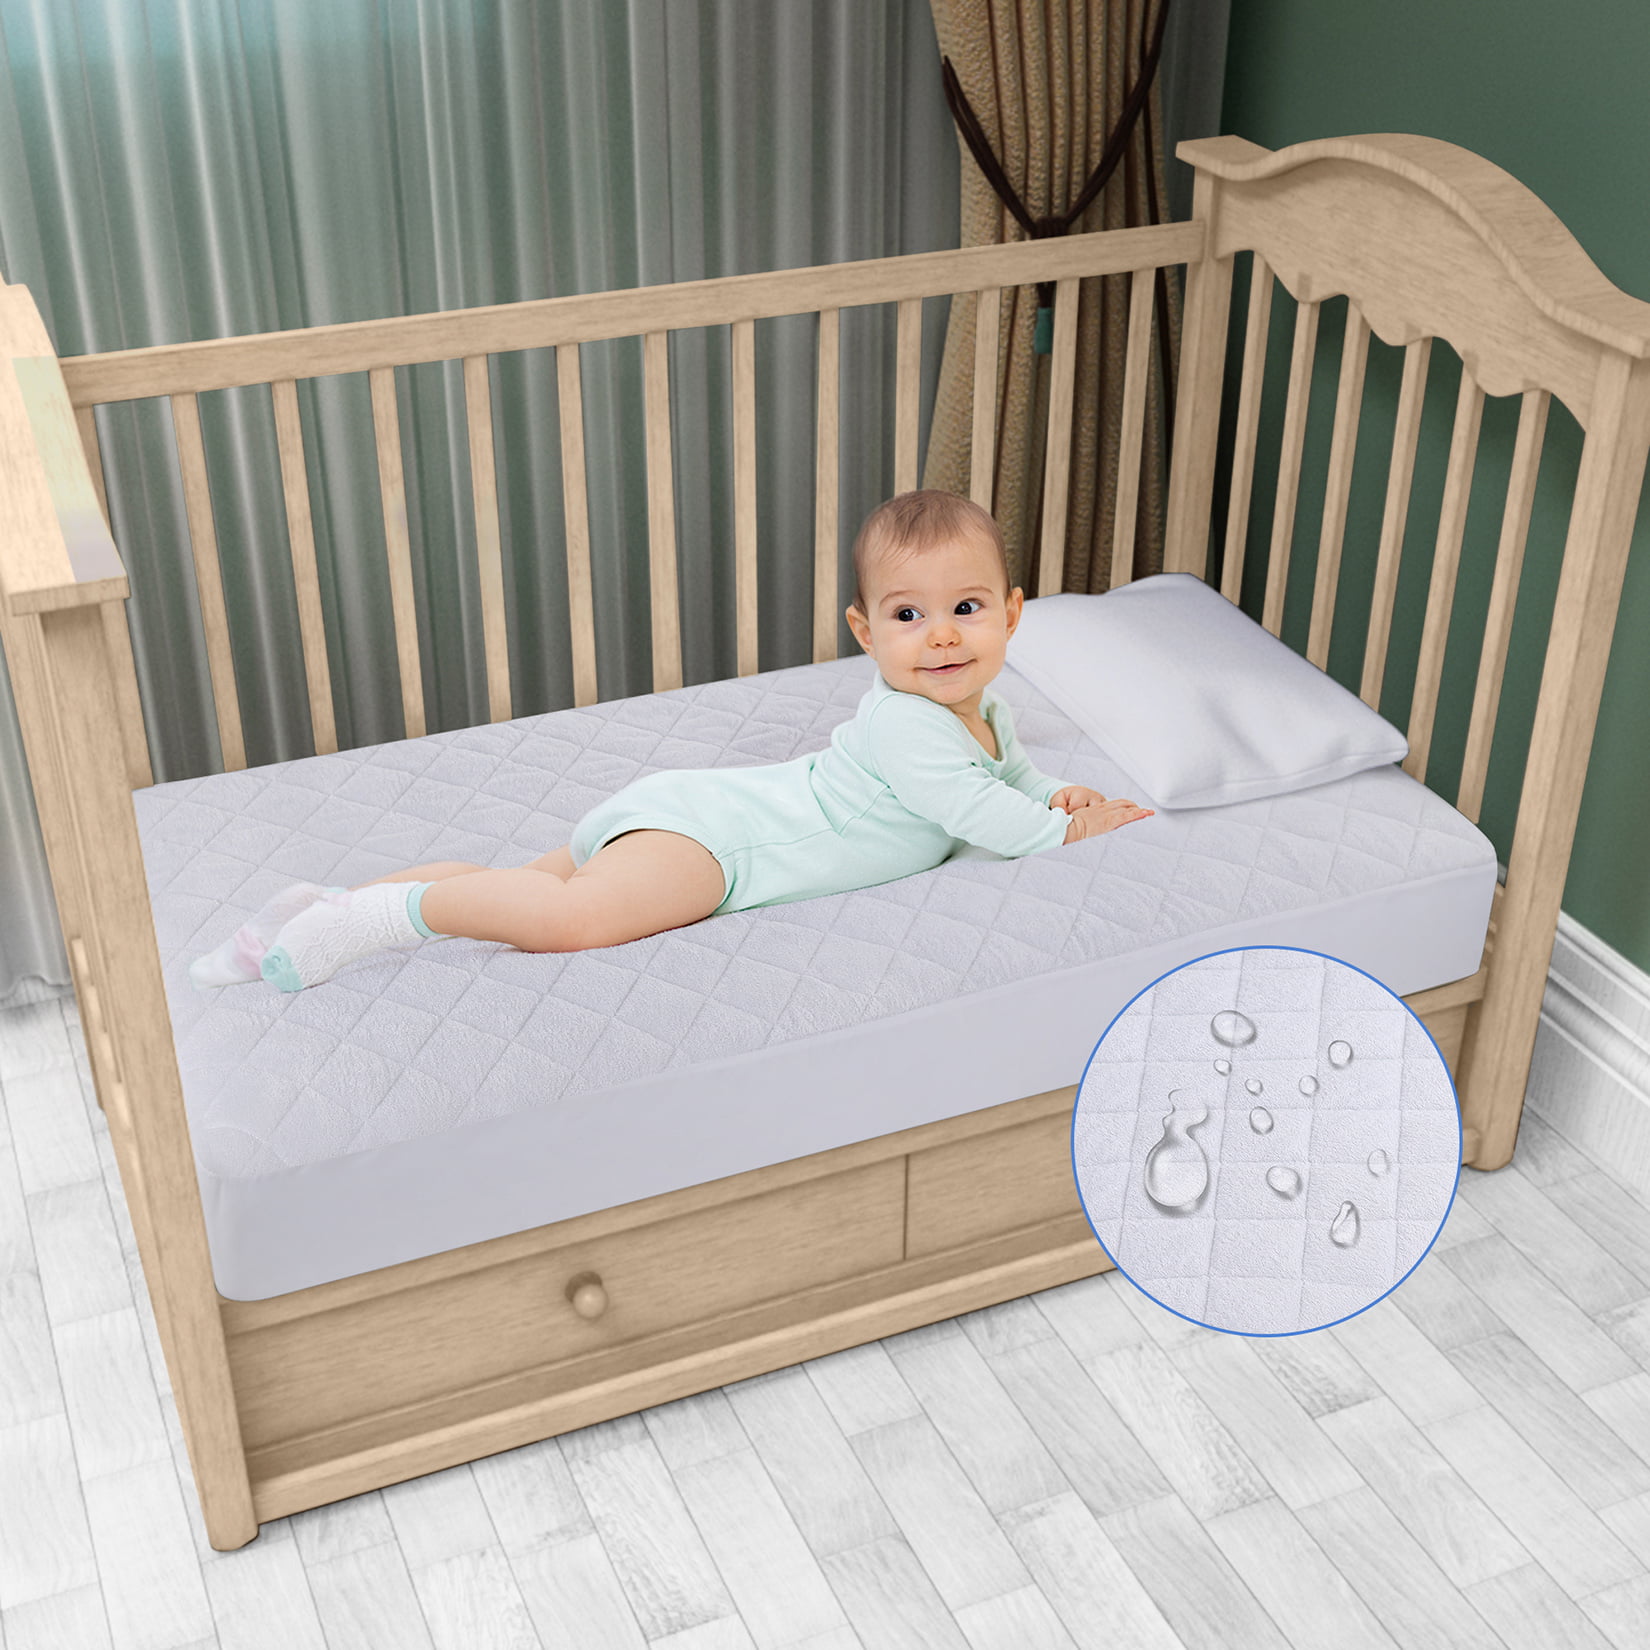 Nursery Crib Baby Mattress cot Crib Size 80 x 43 x 4 cm Breathable Quilted and Waterproof Foam Mattress for cot Cradle